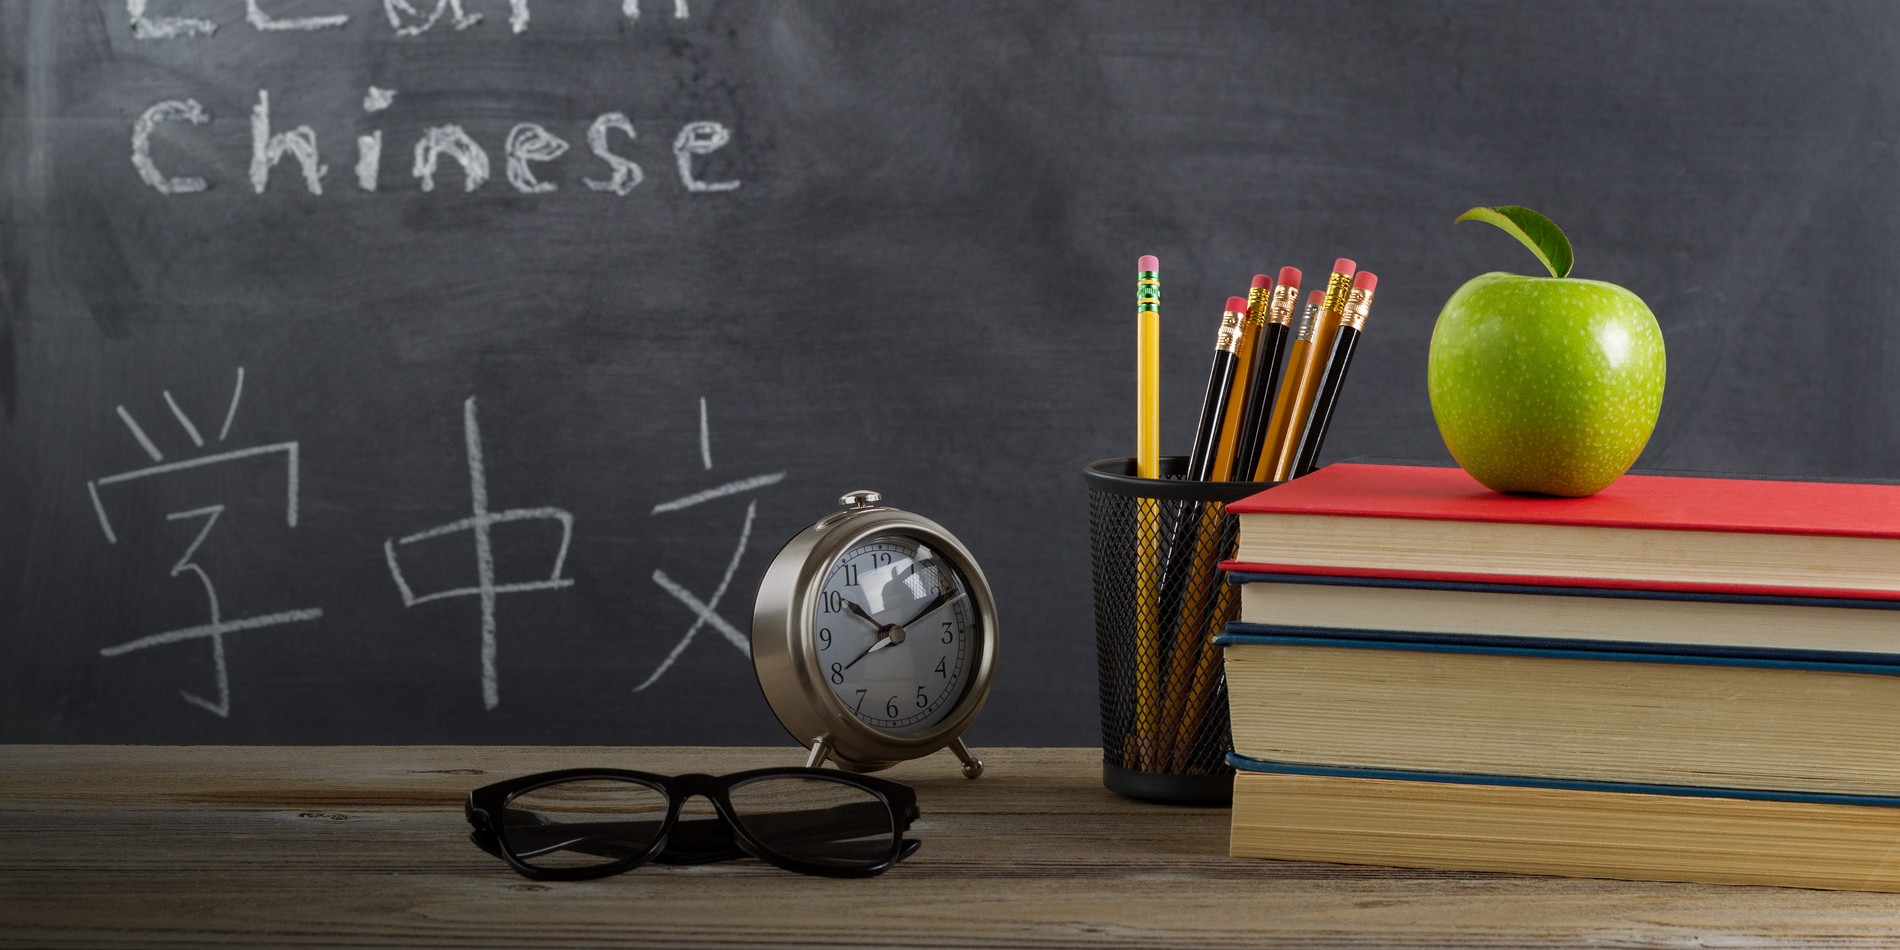 CHINESE PHRASES THAT EVERY ENGLISH TEACHER SHOULD KNOW